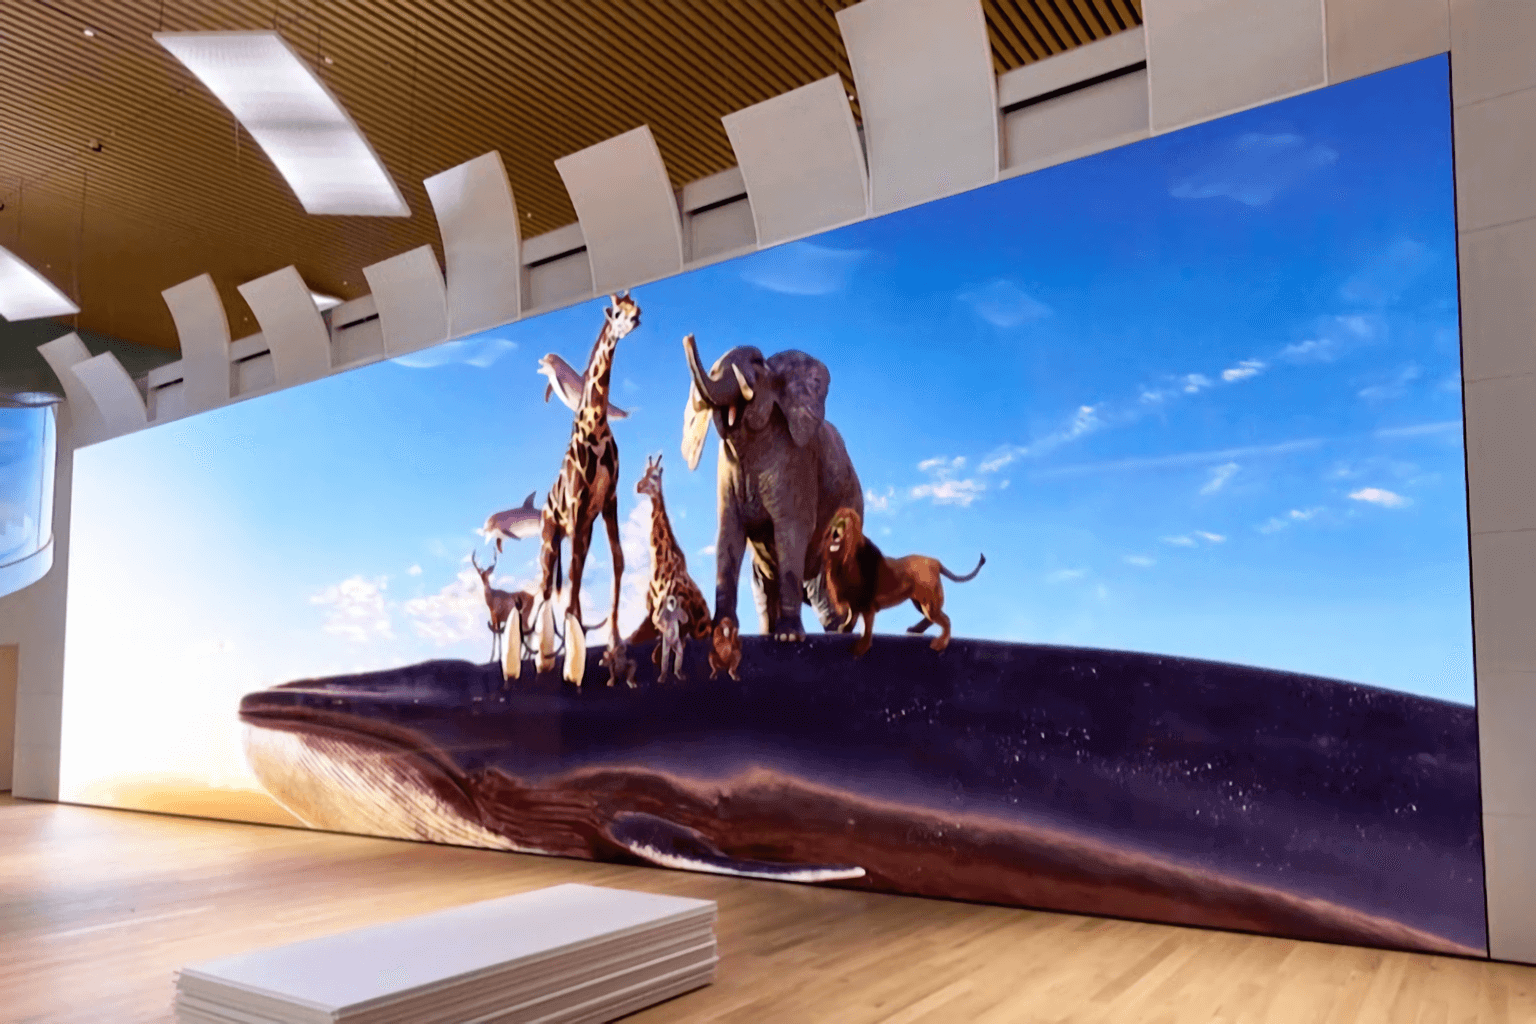 Sony builds a MicroLED 16K screen for Japanese cosmetics business